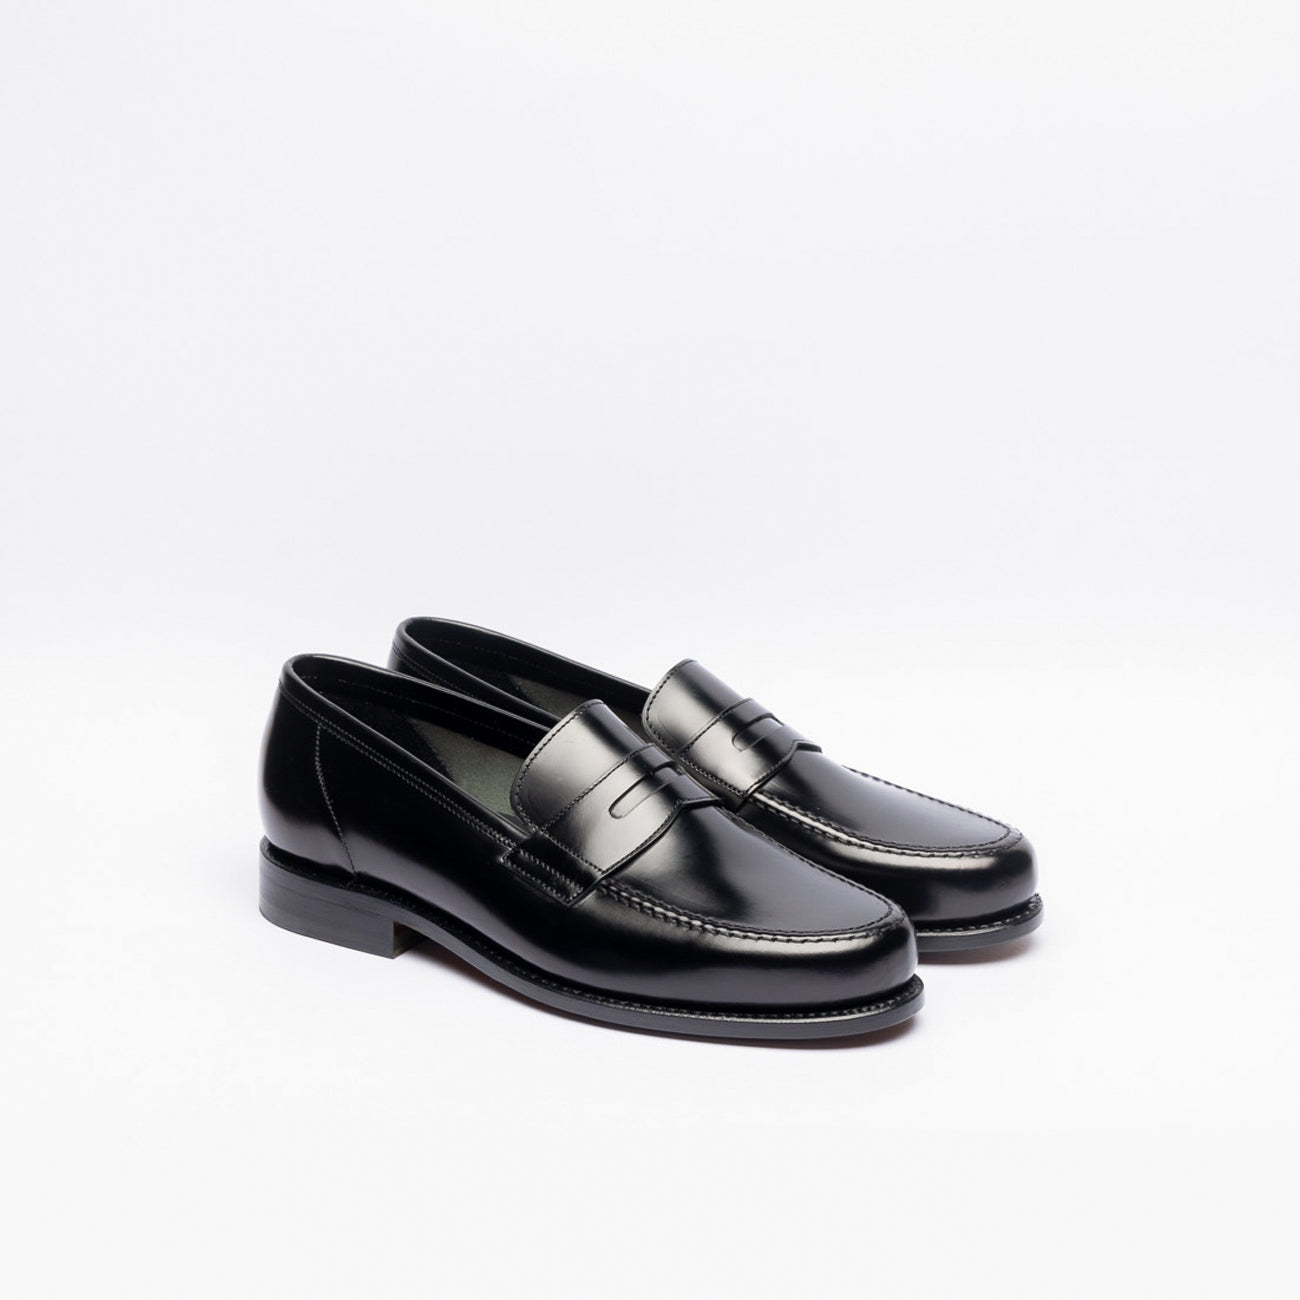 Berwick 5517 penny loafer moccasin in brushed black leather